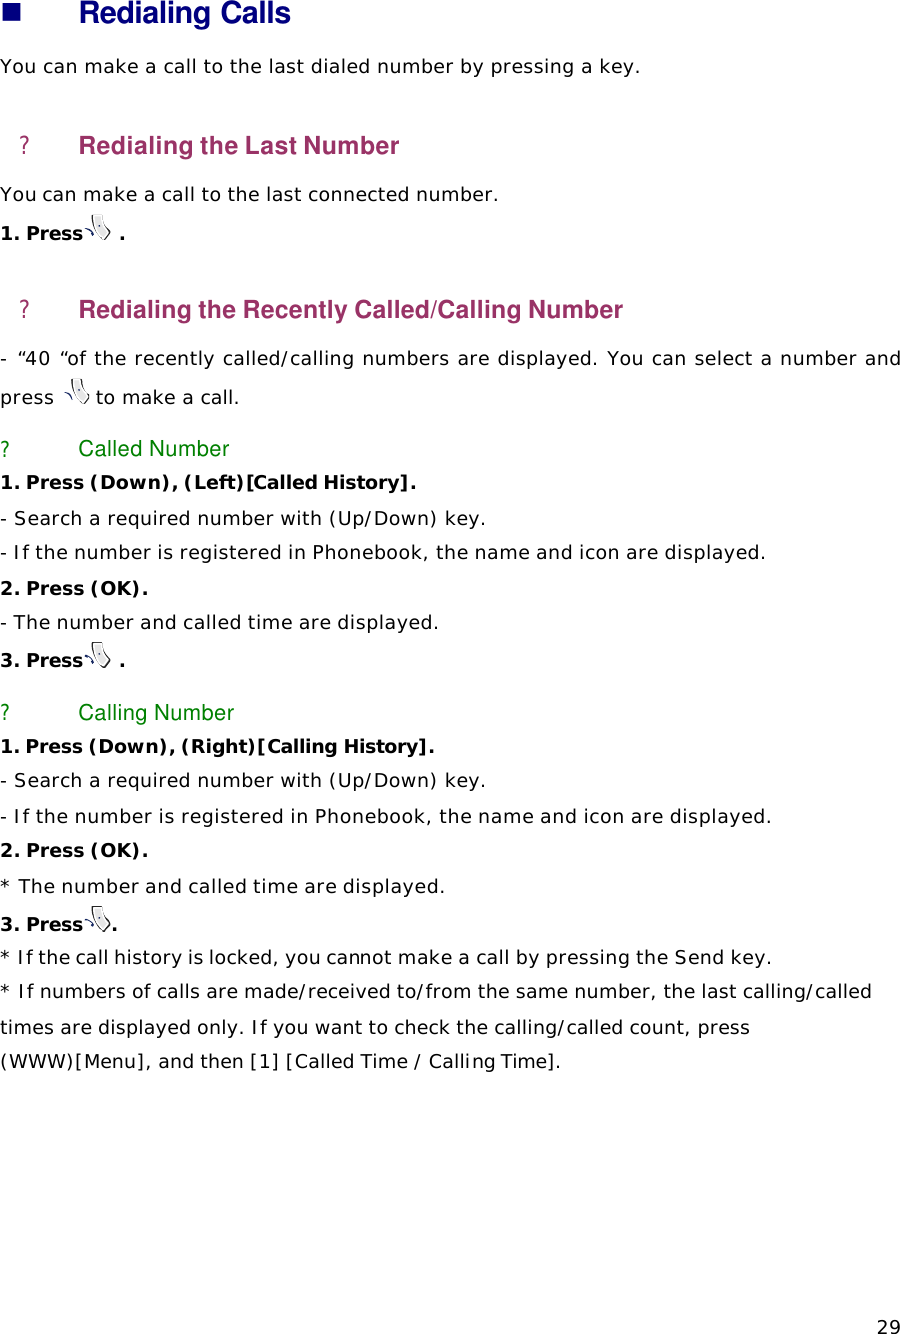   29 n Redialing Calls You can make a call to the last dialed number by pressing a key.   ? Redialing the Last Number You can make a call to the last connected number.  1. Press  . ? Redialing the Recently Called/Calling Number   - “40 “of the recently called/calling numbers are displayed. You can select a number and press   to make a call. ? Called Number 1. Press (Down), (Left)[Called History].  - Search a required number with (Up/Down) key.   - If the number is registered in Phonebook, the name and icon are displayed.   2. Press (OK). - The number and called time are displayed. 3. Press  . ? Calling Number 1. Press (Down), (Right)[Calling History].  - Search a required number with (Up/Down) key.   - If the number is registered in Phonebook, the name and icon are displayed. 2. Press (OK). * The number and called time are displayed. 3. Press .  * If the call history is locked, you cannot make a call by pressing the Send key. * If numbers of calls are made/received to/from the same number, the last calling/called times are displayed only. If you want to check the calling/called count, press (WWW)[Menu], and then [1] [Called Time / Calling Time].   